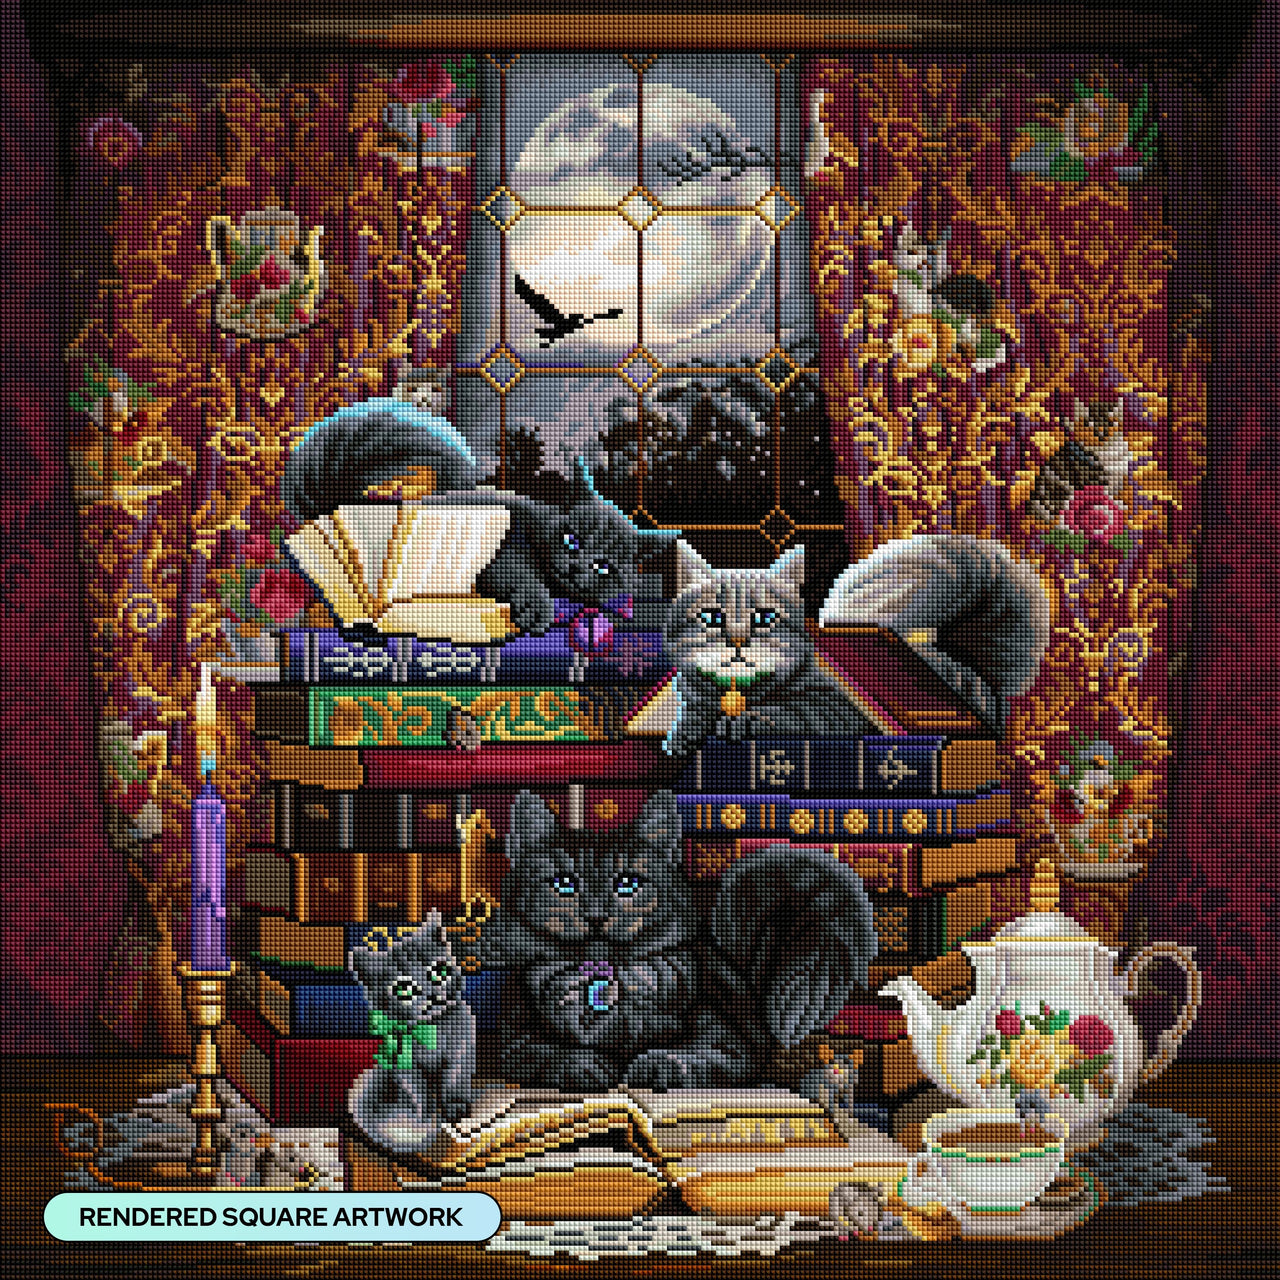 Diamond Painting Storytime Cats & Books 25.6" x 25.6" (65cm x 65cm) / Square With 67 Colors Including 2 ABs, 1 Electro Diamond, and 2 Fairy Dust Diamonds / 68,121